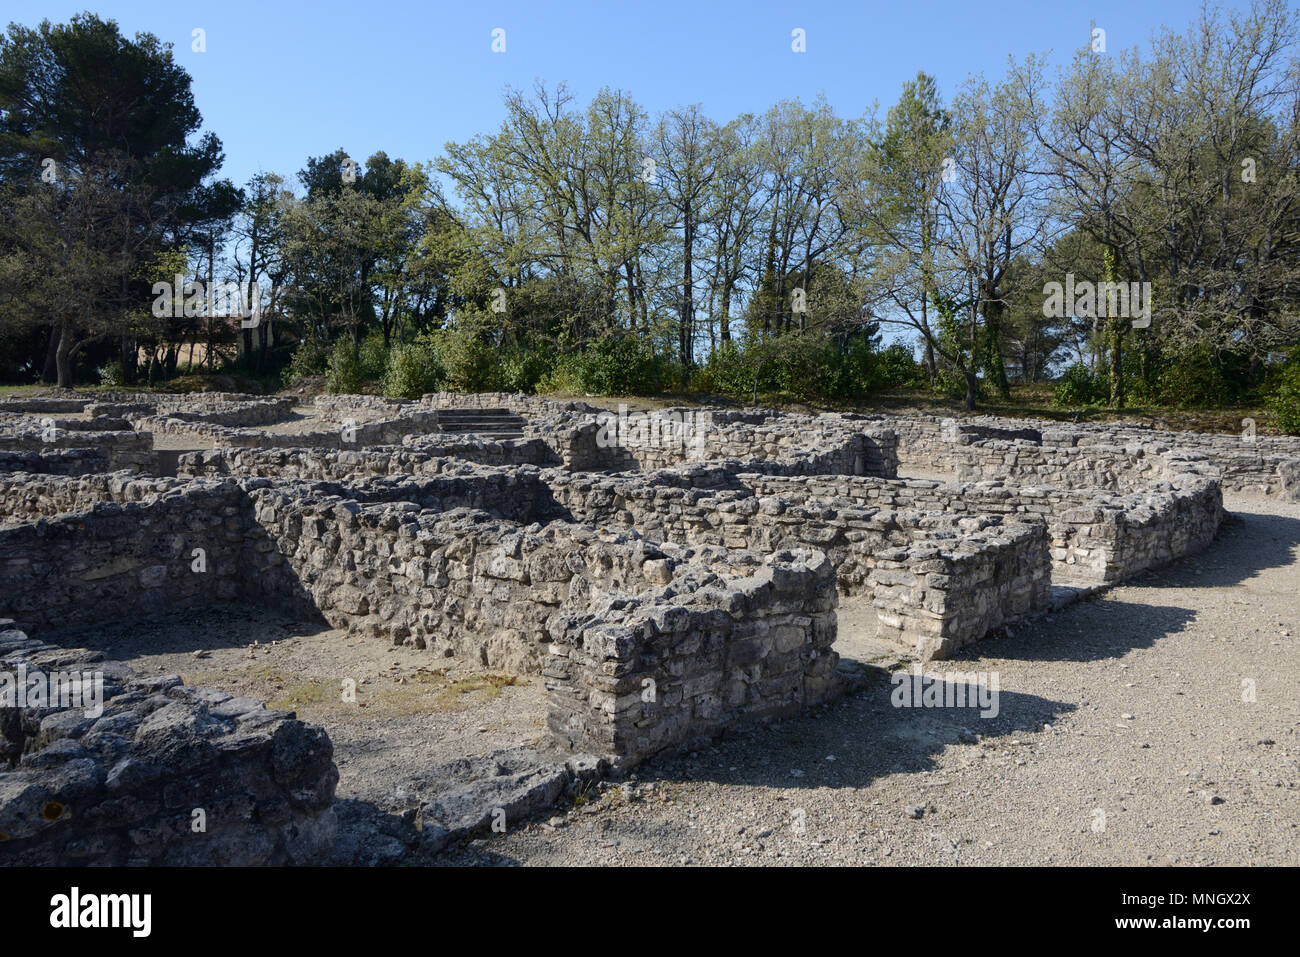 Remains & Foundations of Ruined Ancient Houses in the Upper Town of Entremont Oppidum (180-170BC), Salyes Capital, Aix-en-Provence Provence france Stock Photo